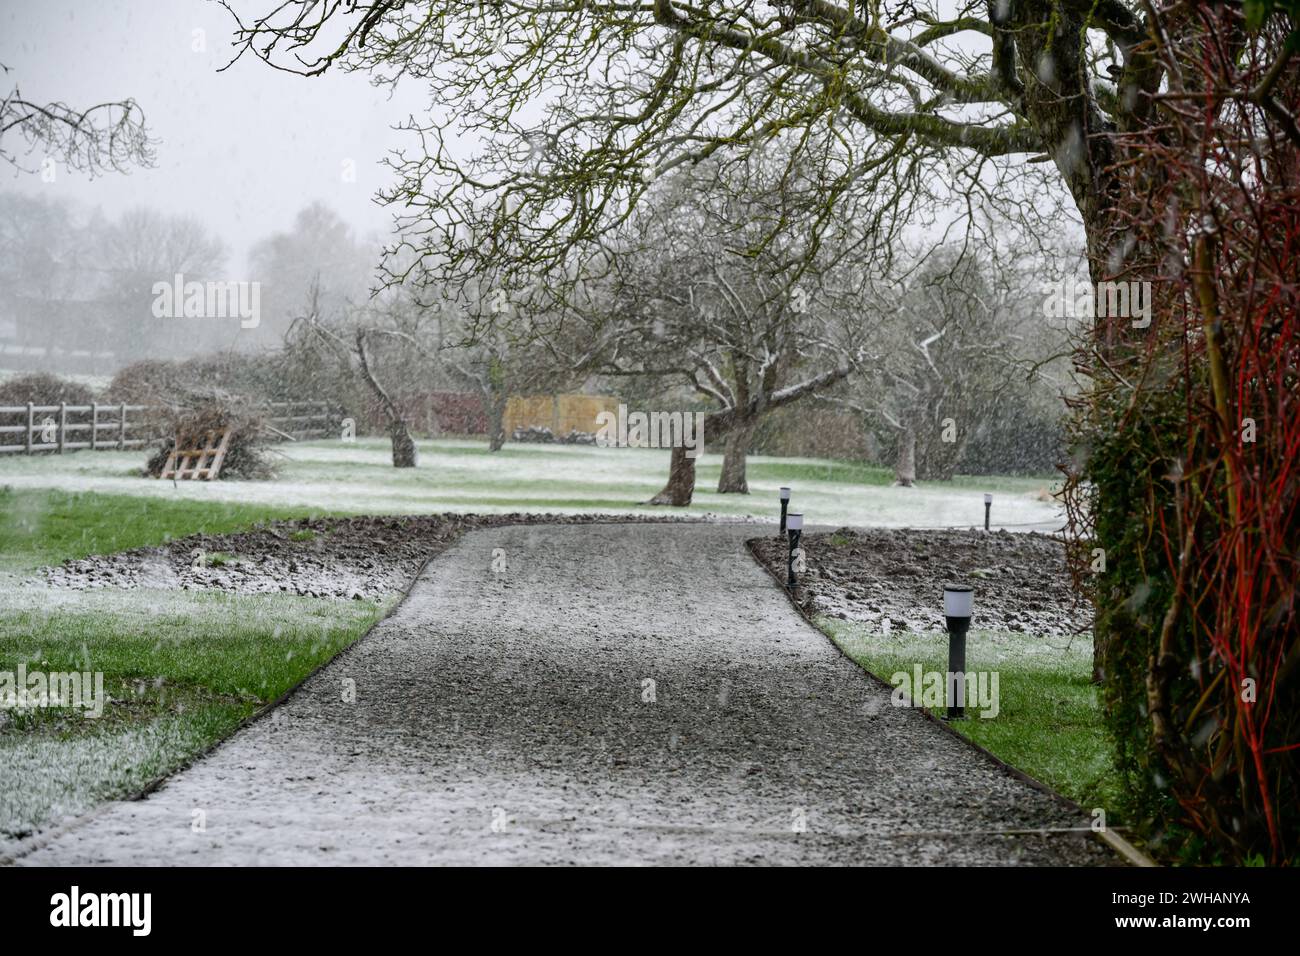 A view down a driveway with a sprinkling of snow Stock Photo